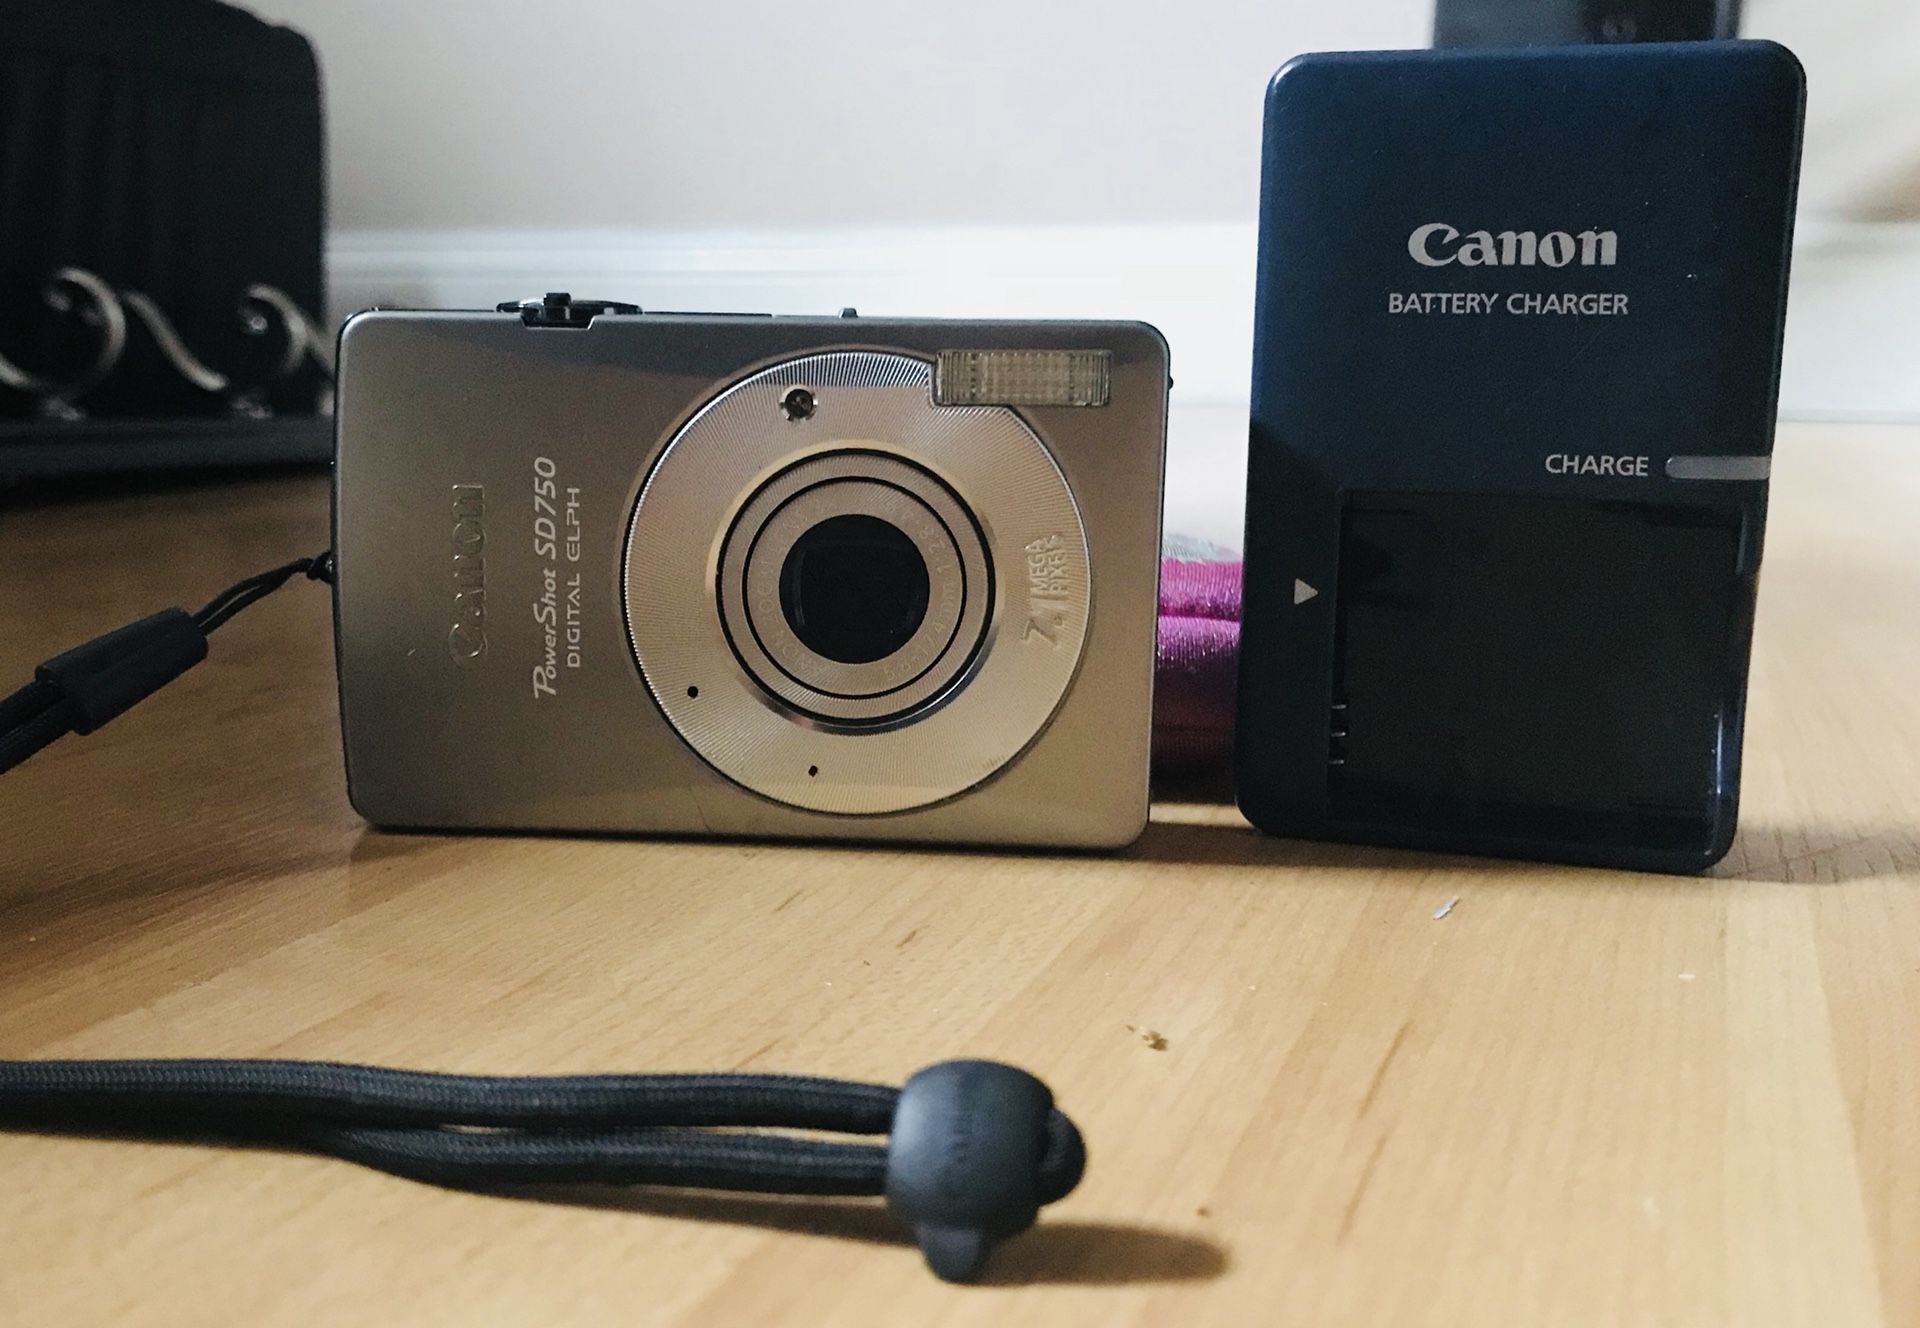 Canon PowerShot SD750 7.1MP Digital Elph Camera with 3x Optical Zoom